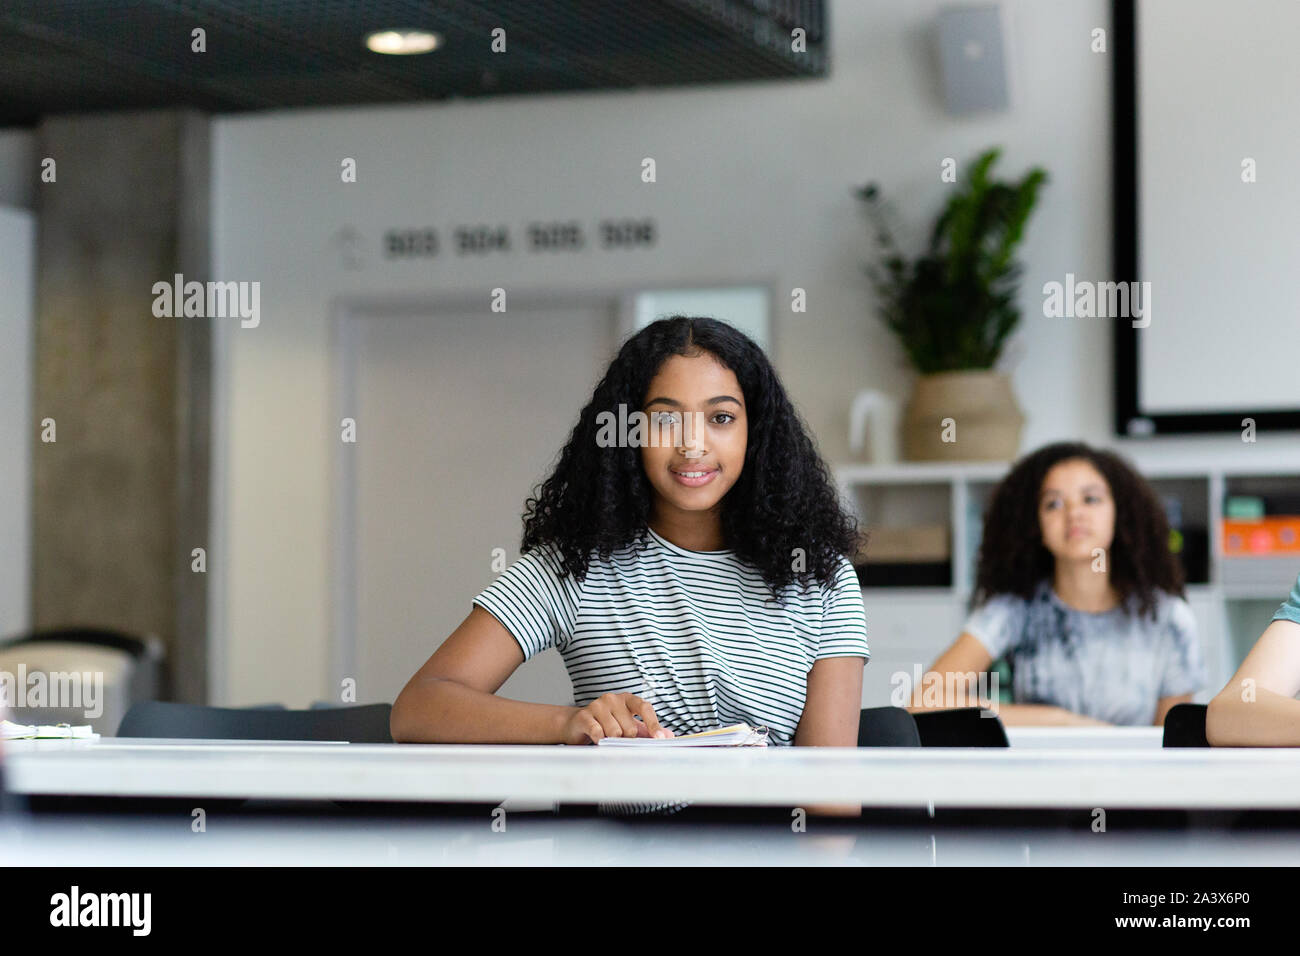 Portrait of female high school student in class Banque D'Images